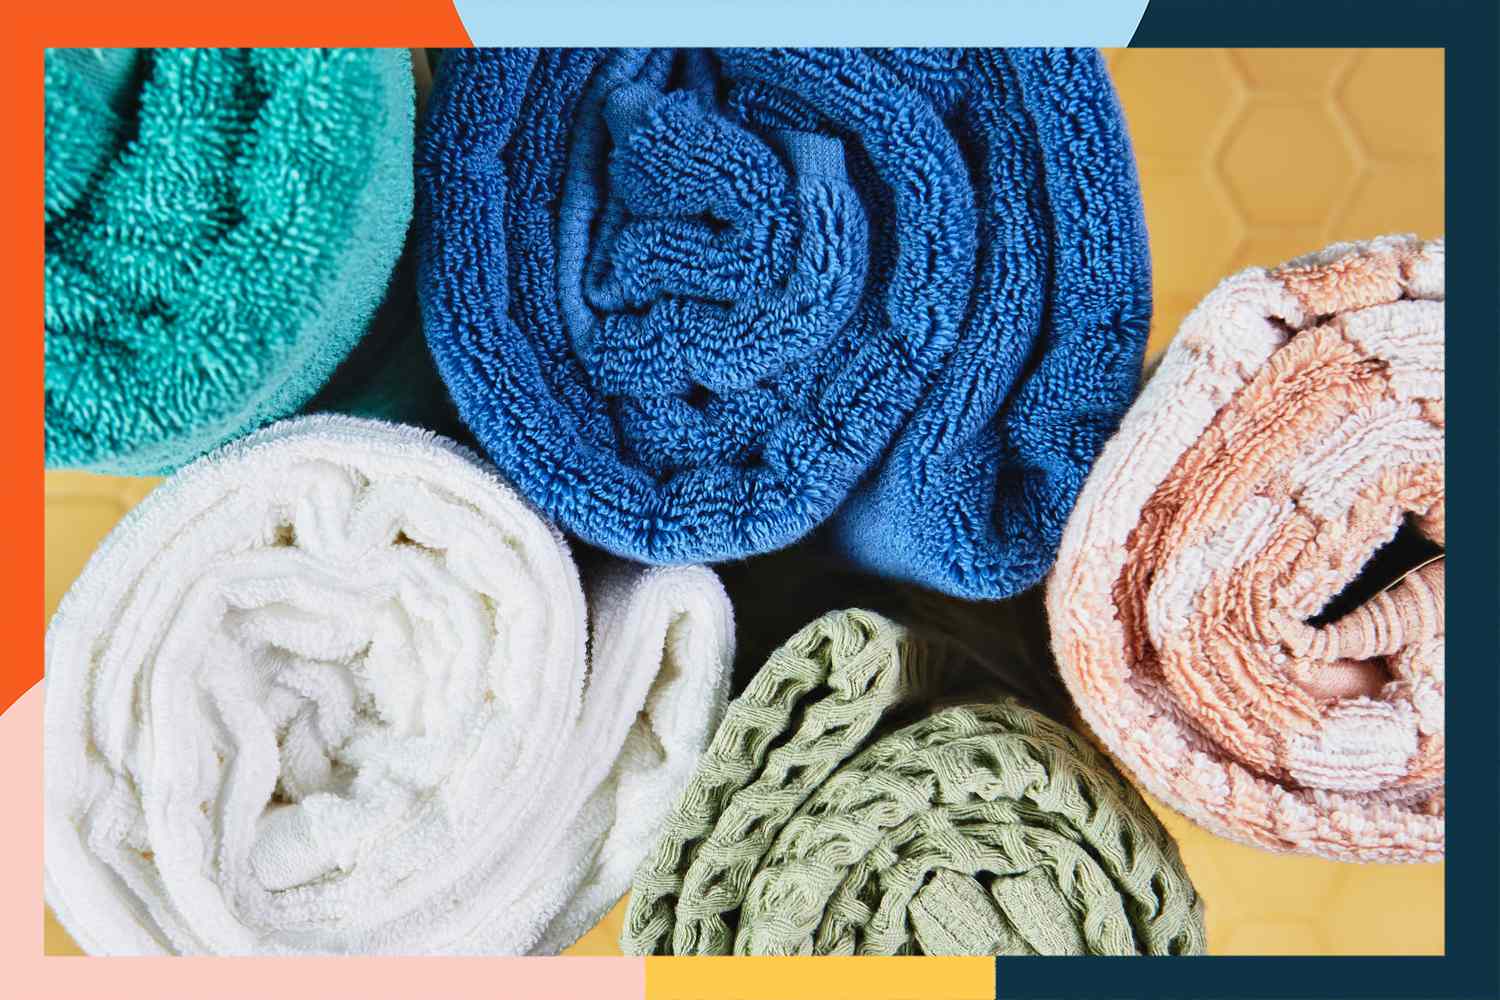 Close up of a variety of bath towels rolled up